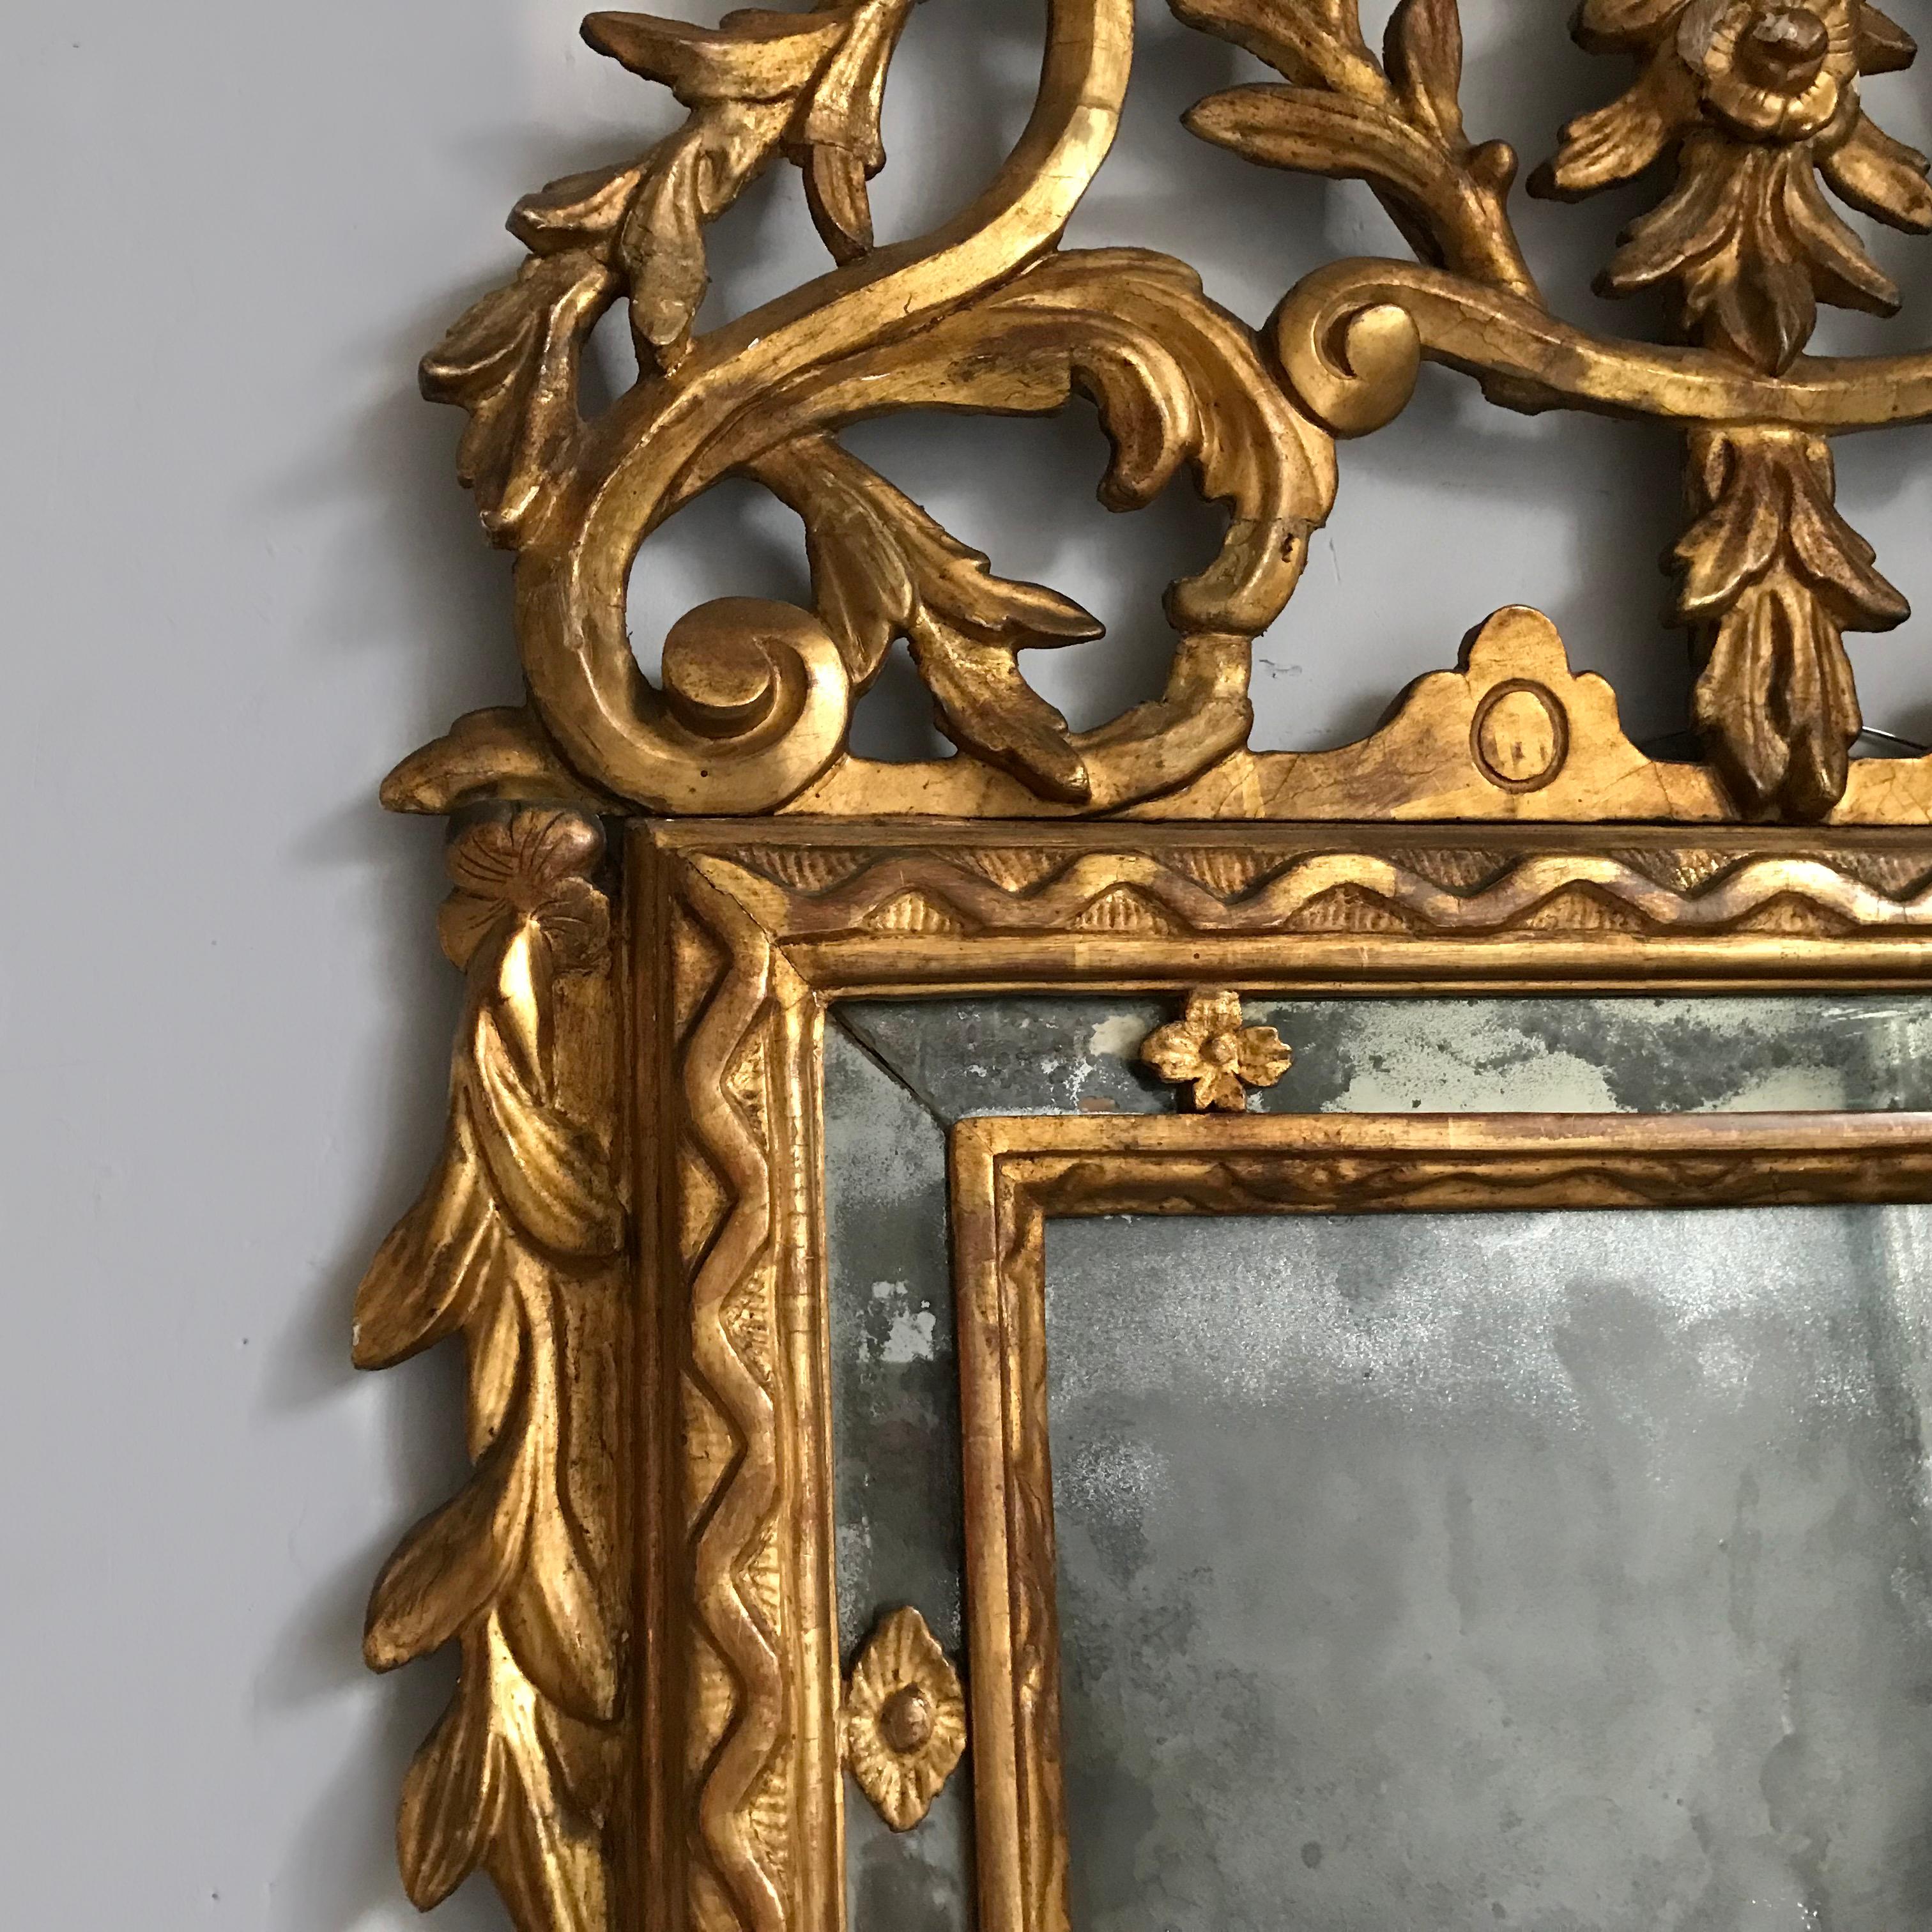 This North Italian late C18th giltwood mirror amazingly retains its original wonderfully foxed mercury glass plate set within a mirrored frame surrounded by continuous zig-zag carving. The pierced apron and cresting is boldly carved with flowers,